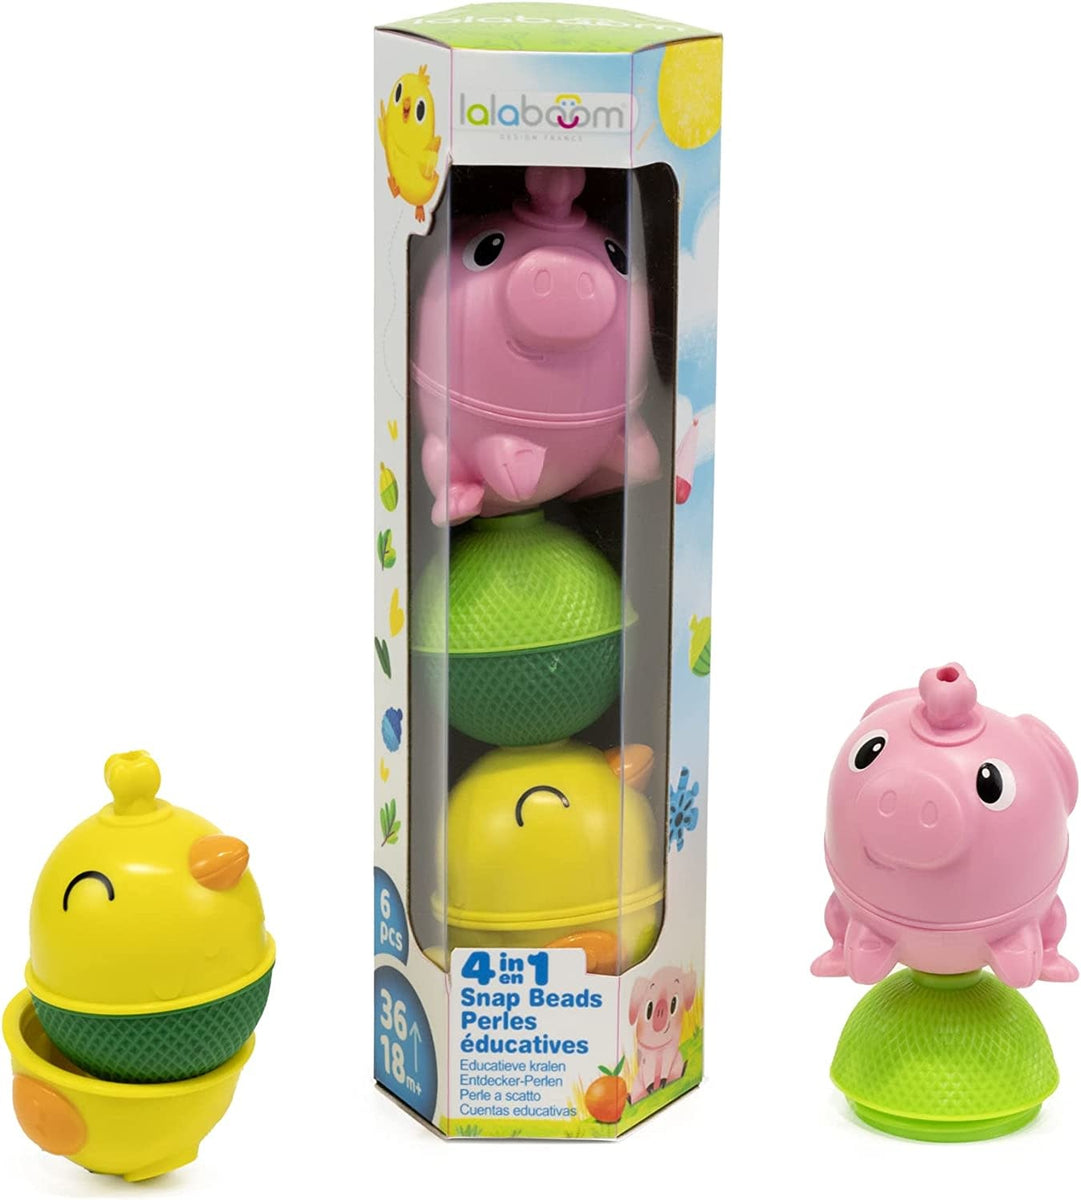 Lalaboom First Connect Toys - Fun Stuff Toys